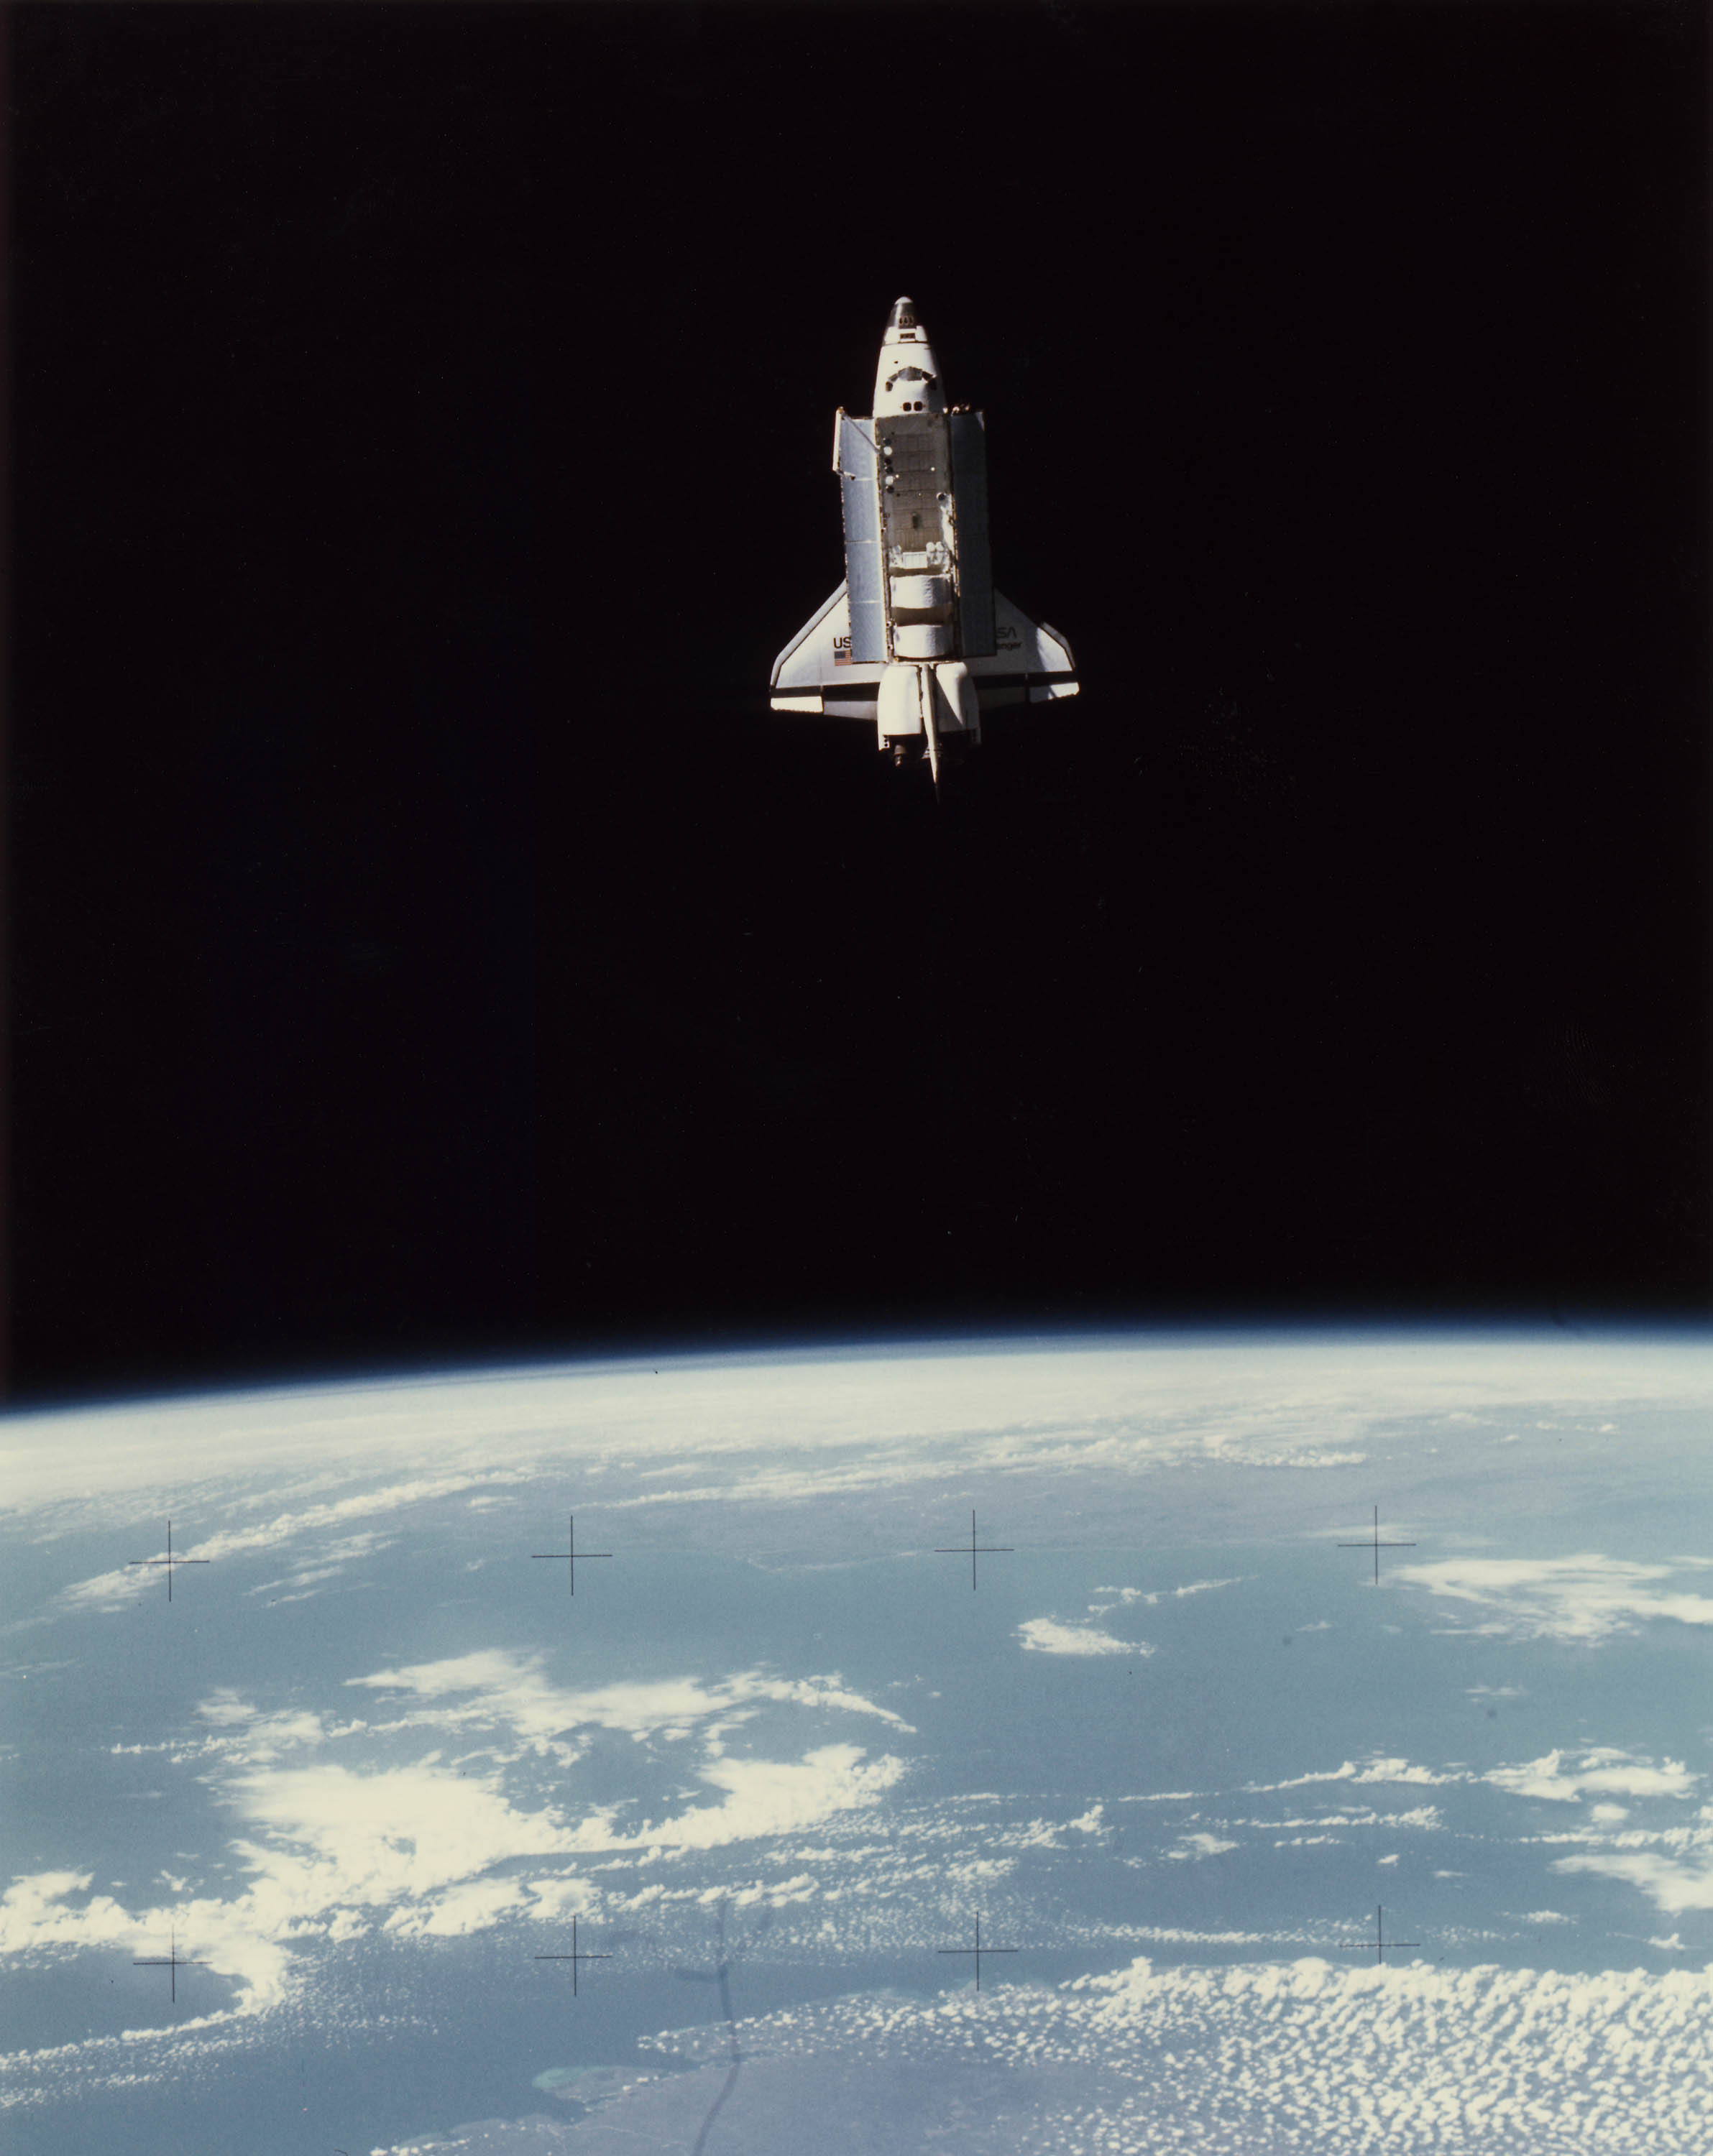 http://www.archives.gov/press/press-kits/picturing-the-century-photos/space-shuttle-challenger.jpg